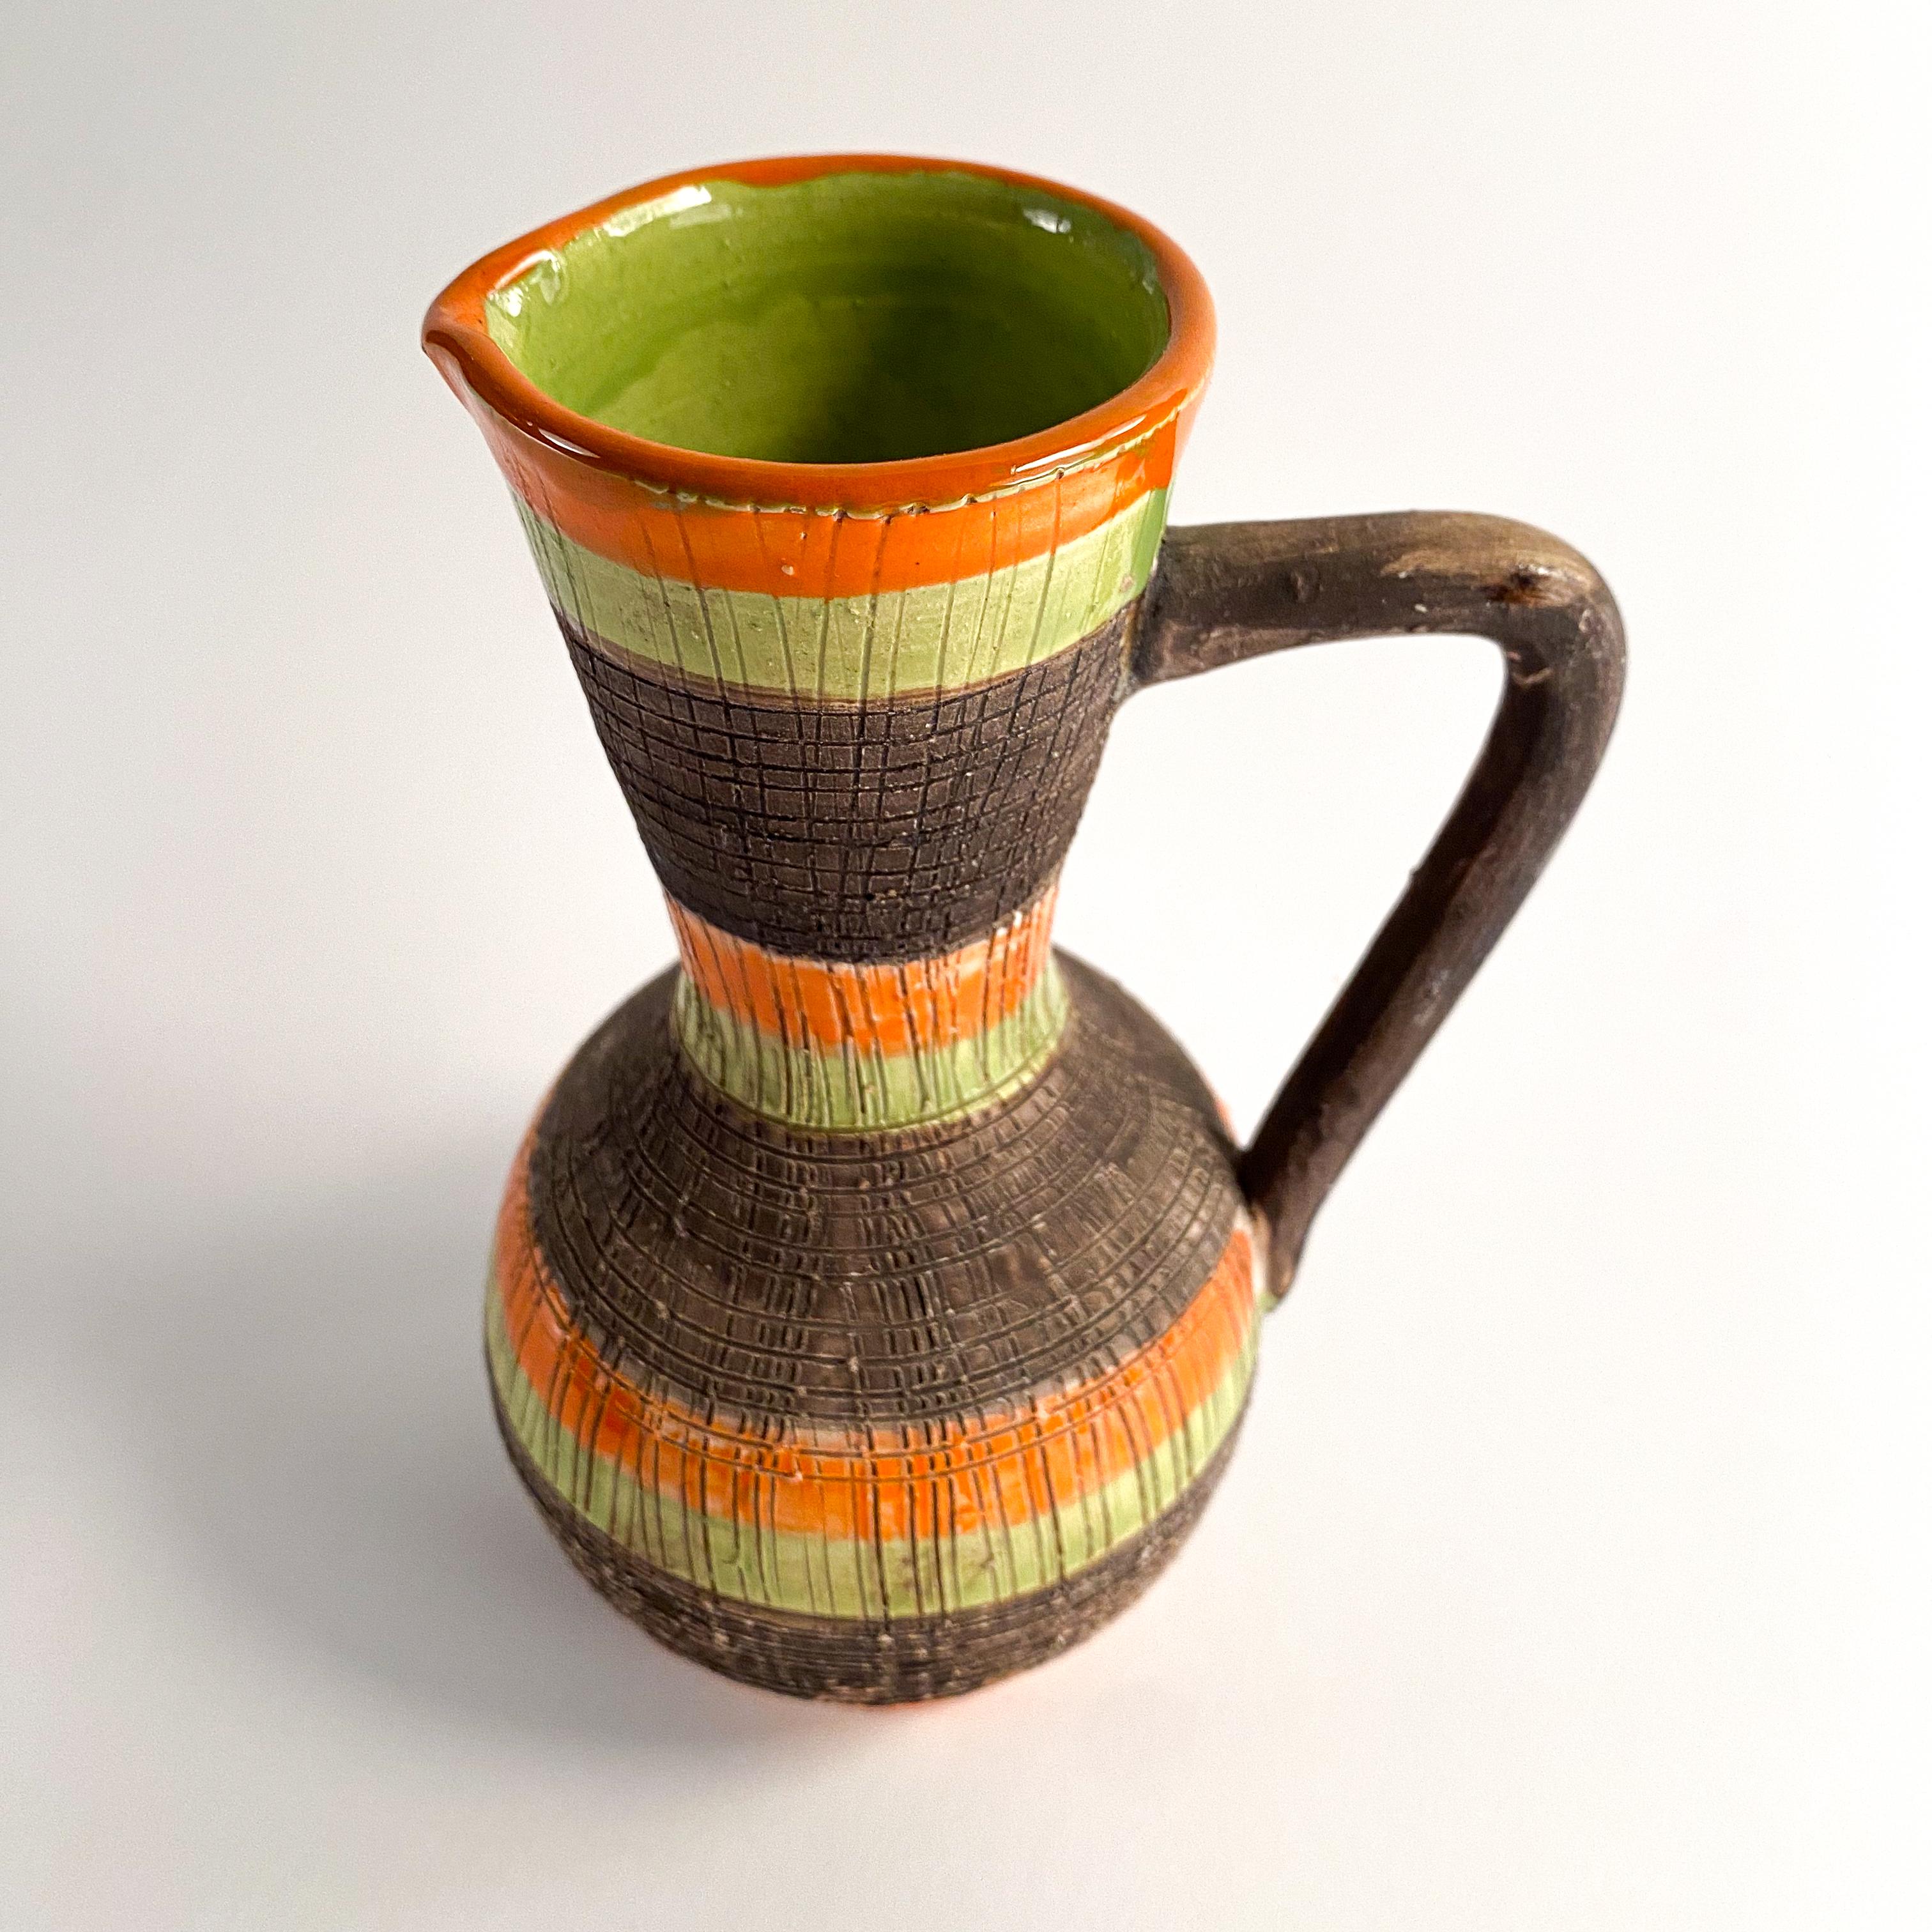 great looking ceramic pitcher vase. has good colors, brown green and orange. marked made in Italy on the underside.